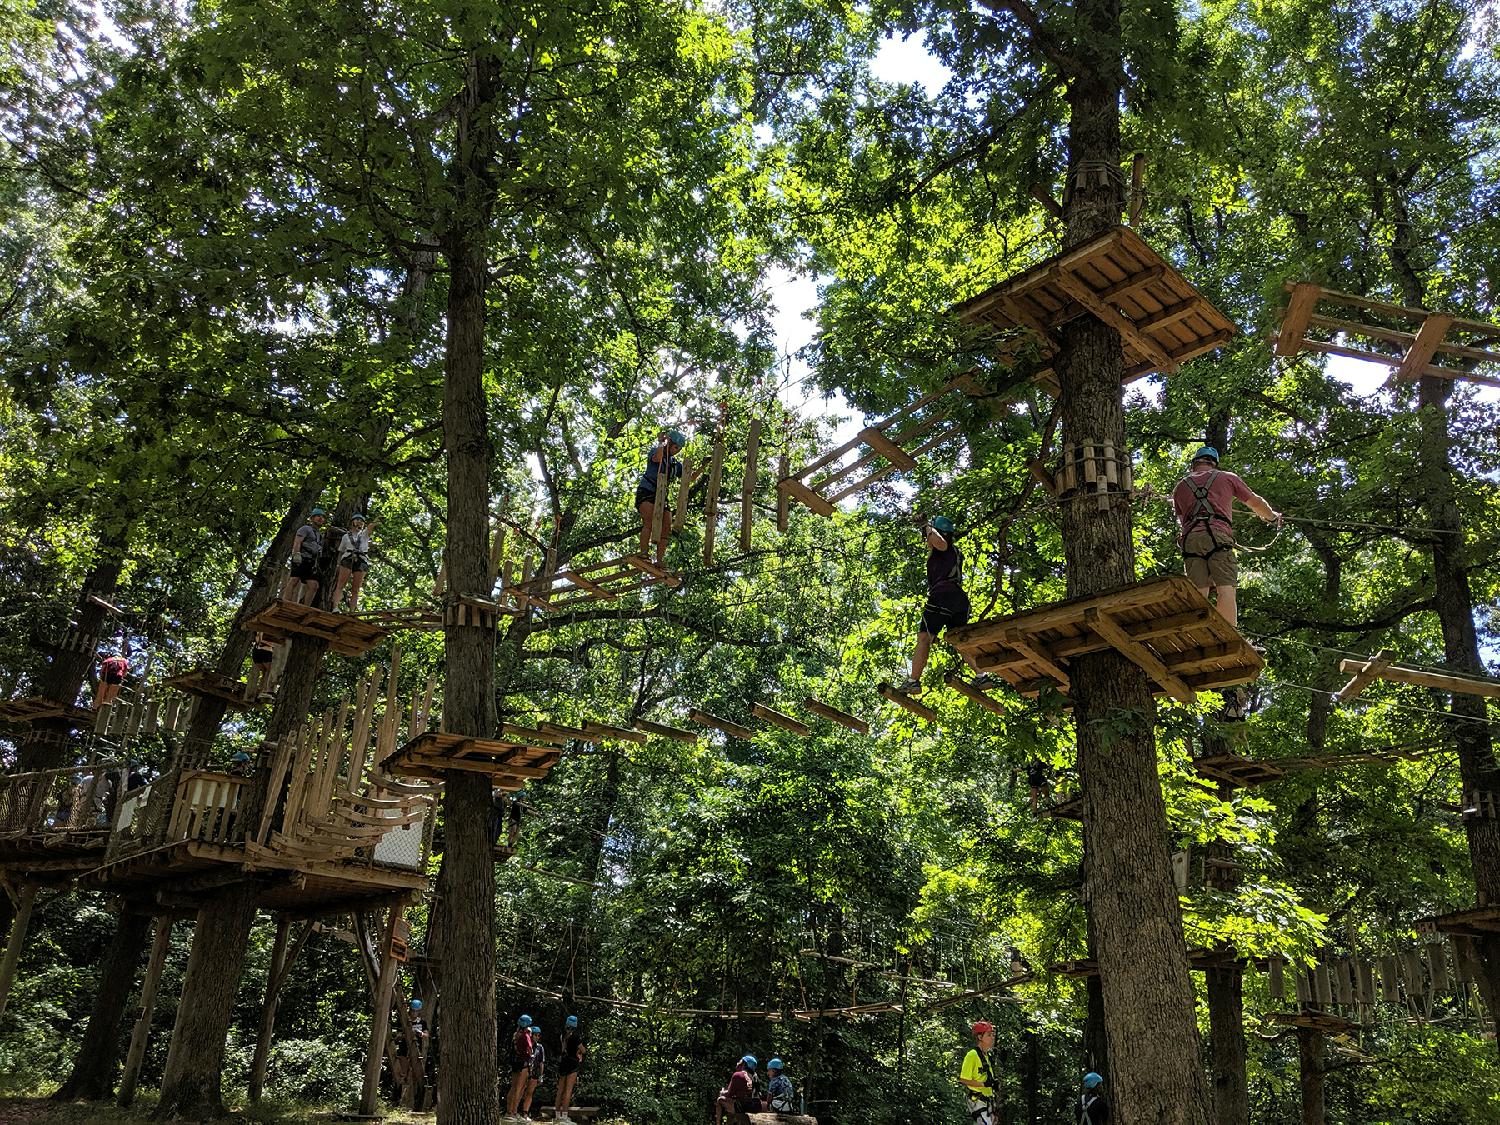 During the annual summer picnic, South Bend staff and their families have fun up in the trees at the Rum Village Aerial Climb.